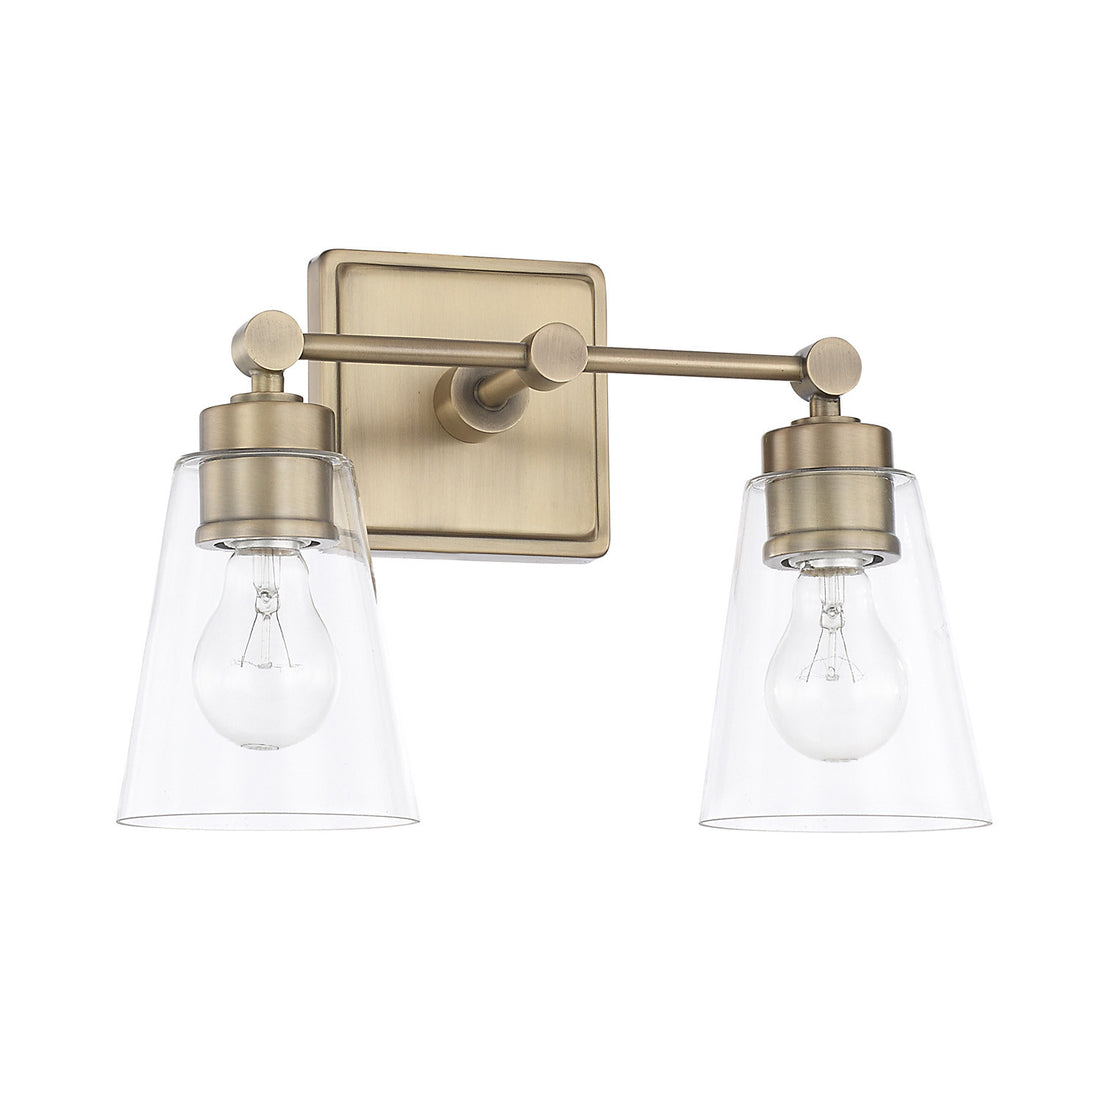 2 Light Enright Vanity in Aged Brass with clear cone shaped glass shades by Capital Lighting 121821AD-432